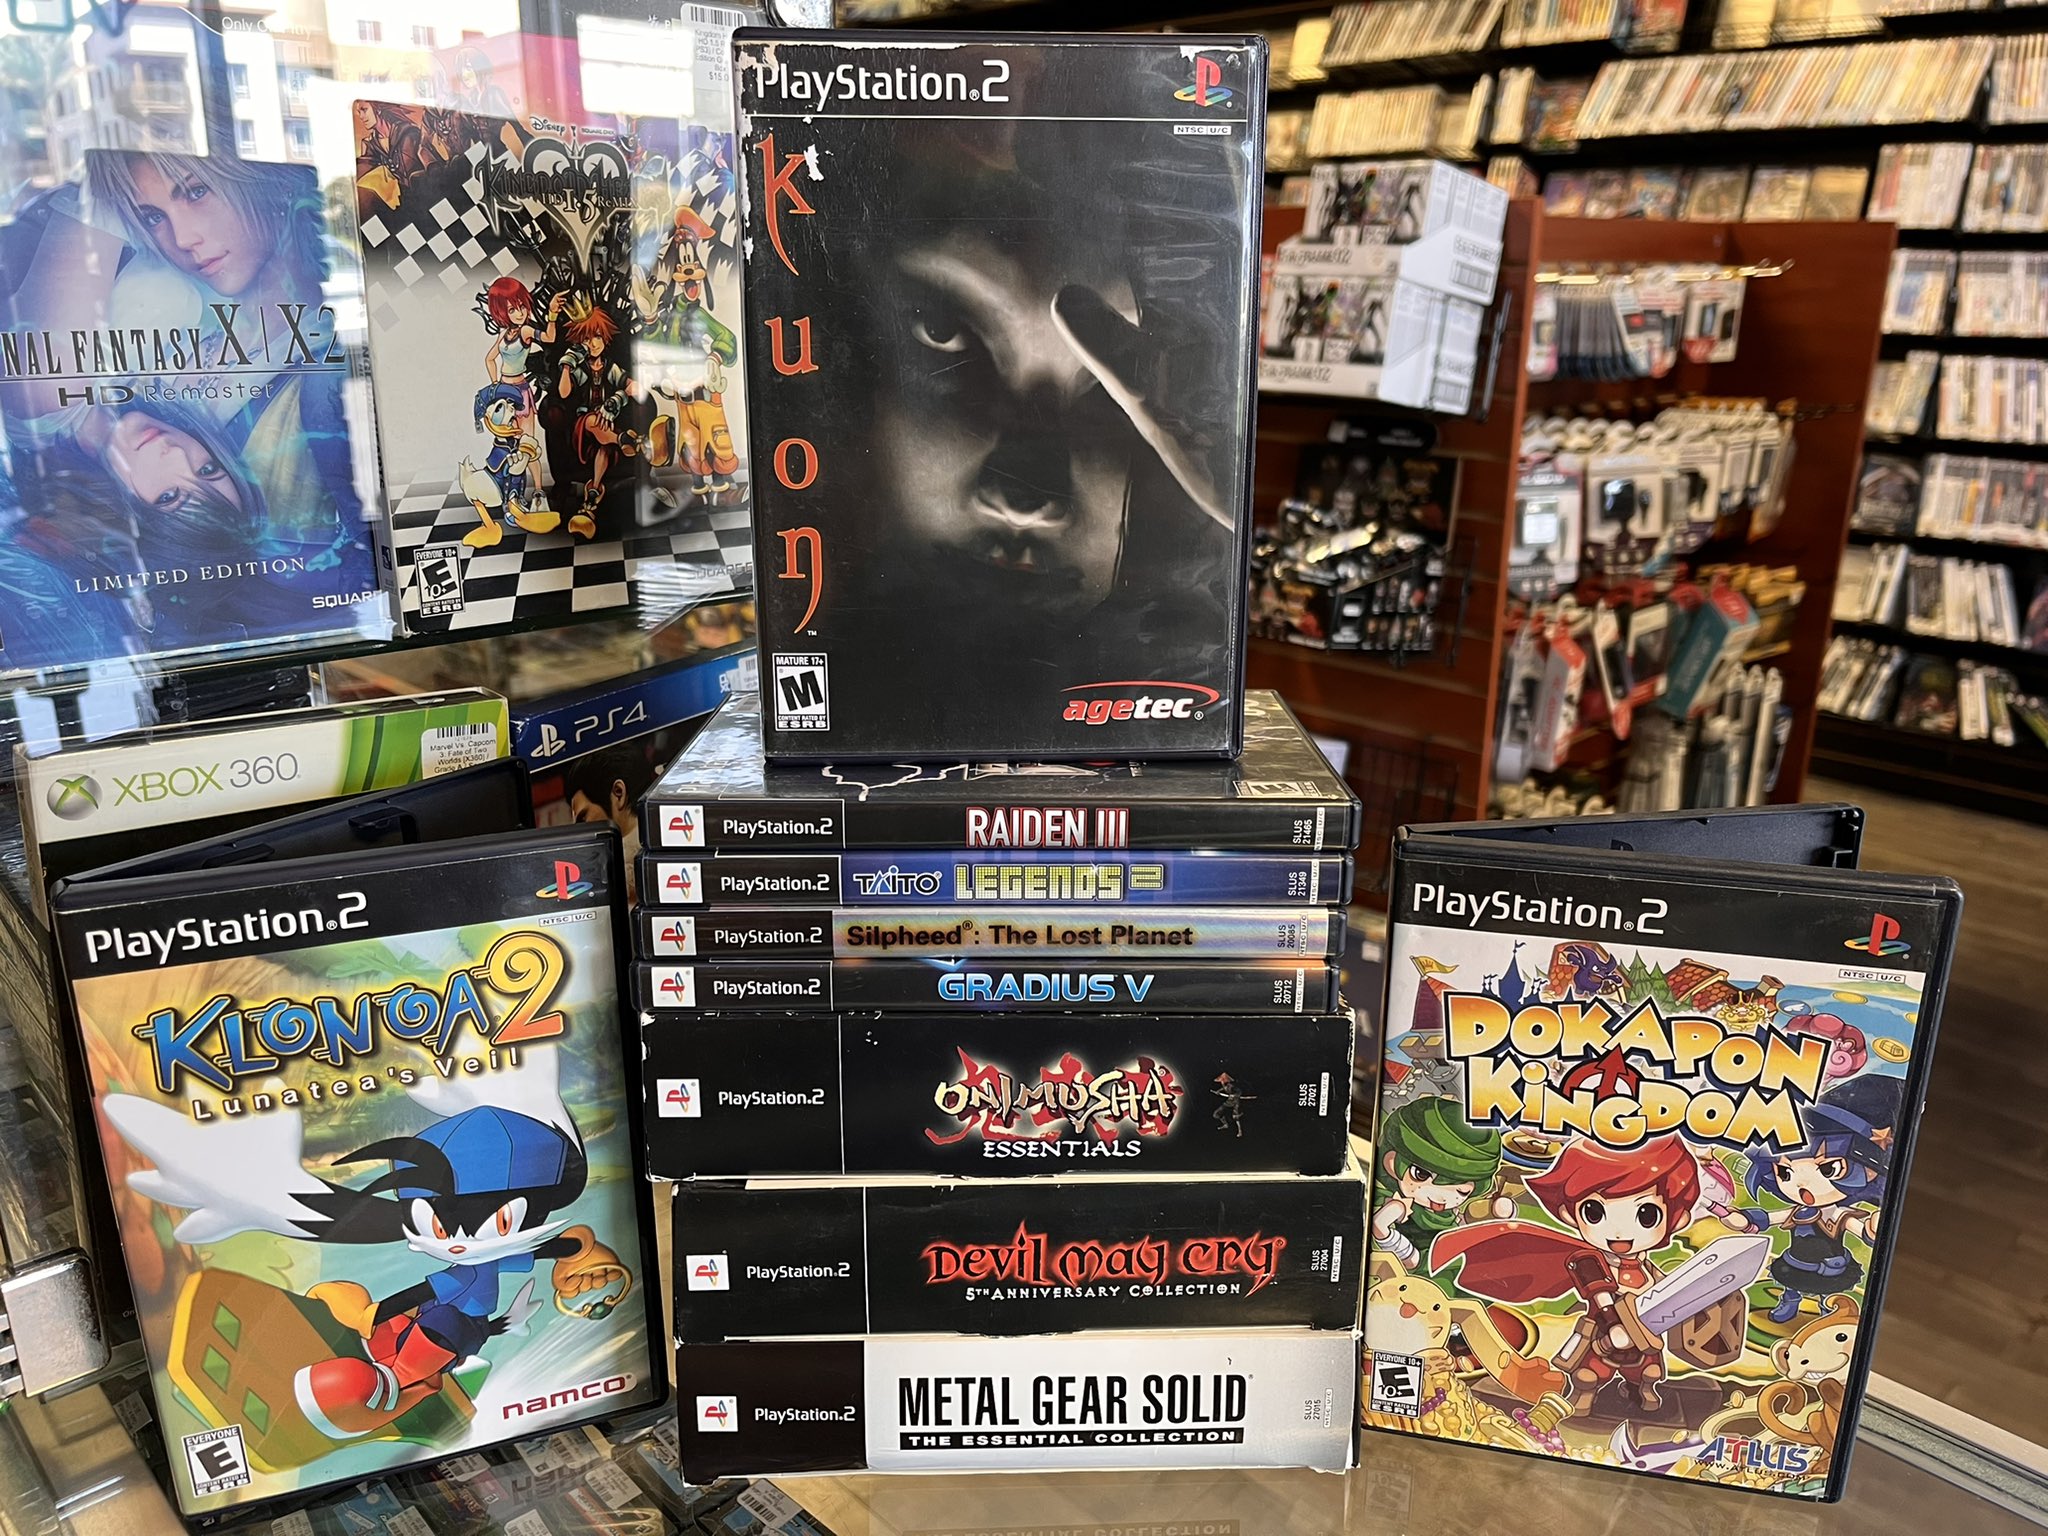 Karriere kapillærer gødning Calico Gaming on Twitter: "Lots of new rare PS2 games available at our Mira  Mesa location today! https://t.co/yAQqYJlly4" / Twitter